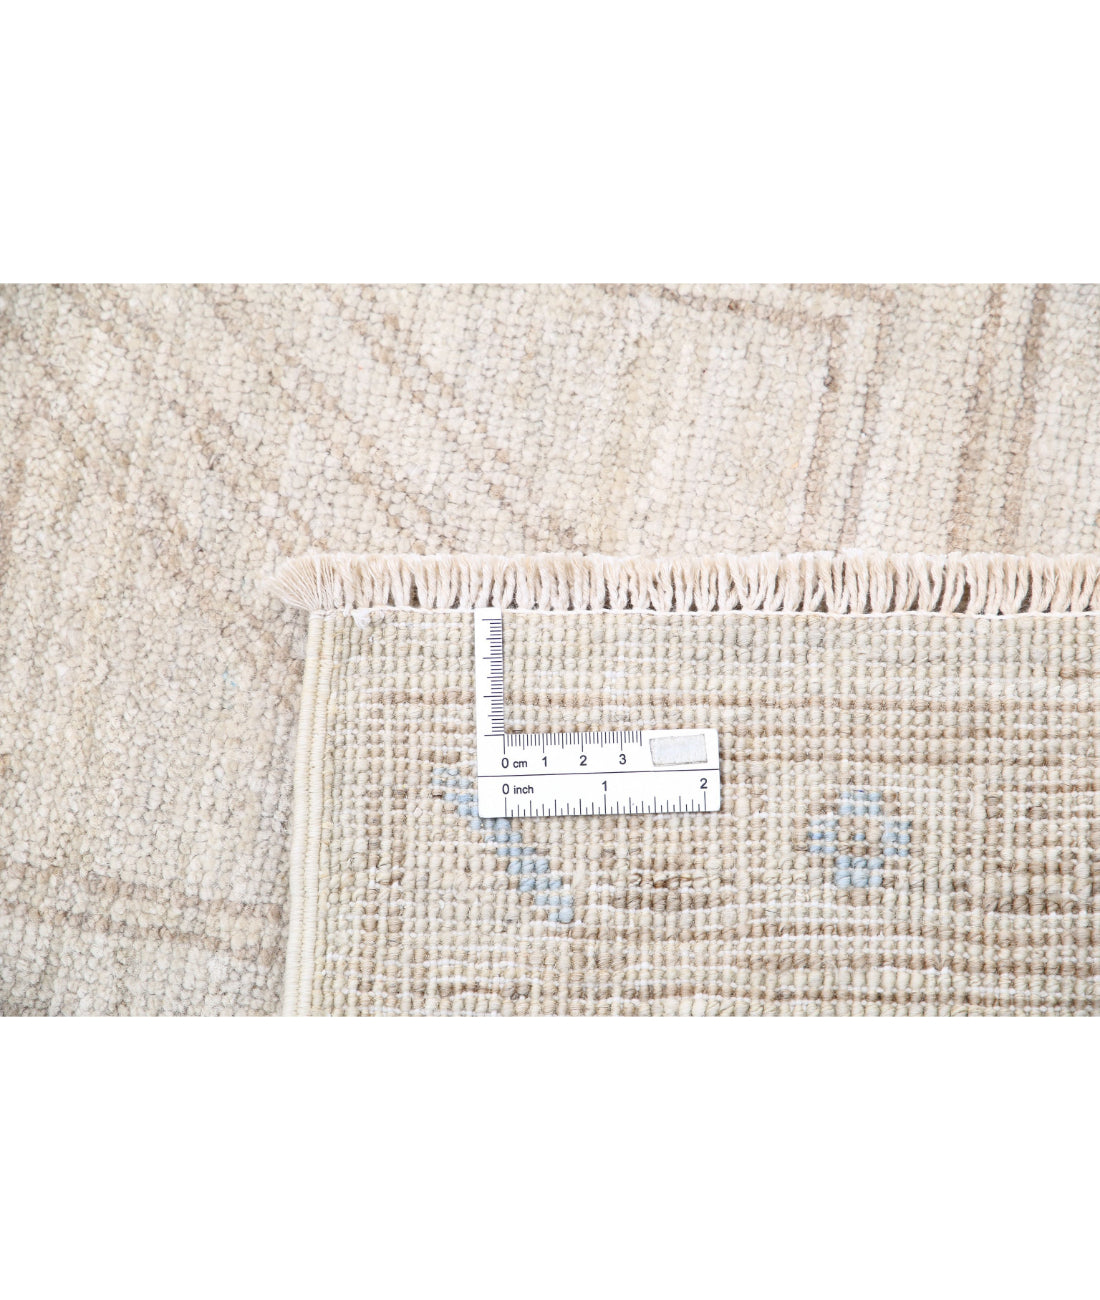 Hand Knotted Khotan Wool Rug - 9'10'' x 14'11'' 9'10'' x 14'11'' (295 X 448) / Ivory / Taupe